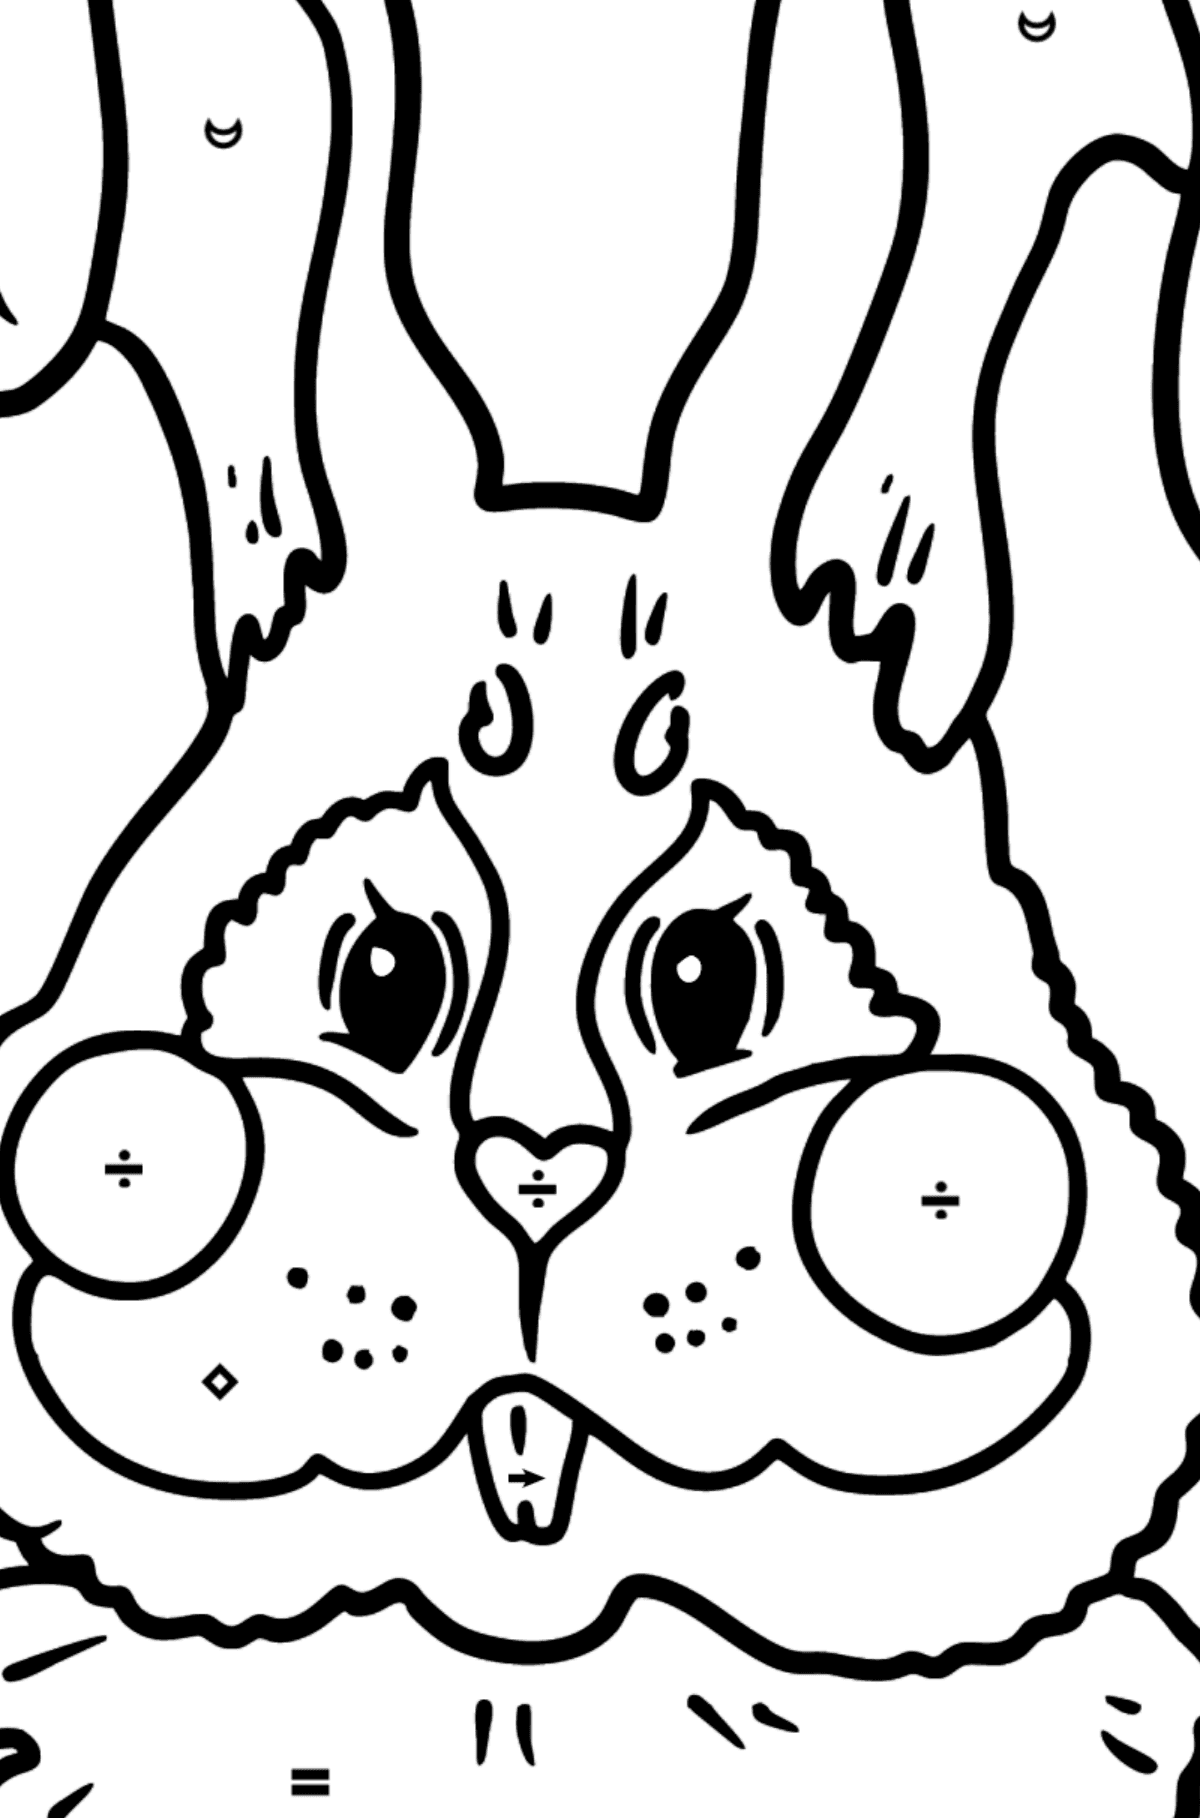 Bunny Face coloring page - Coloring by Symbols for Kids